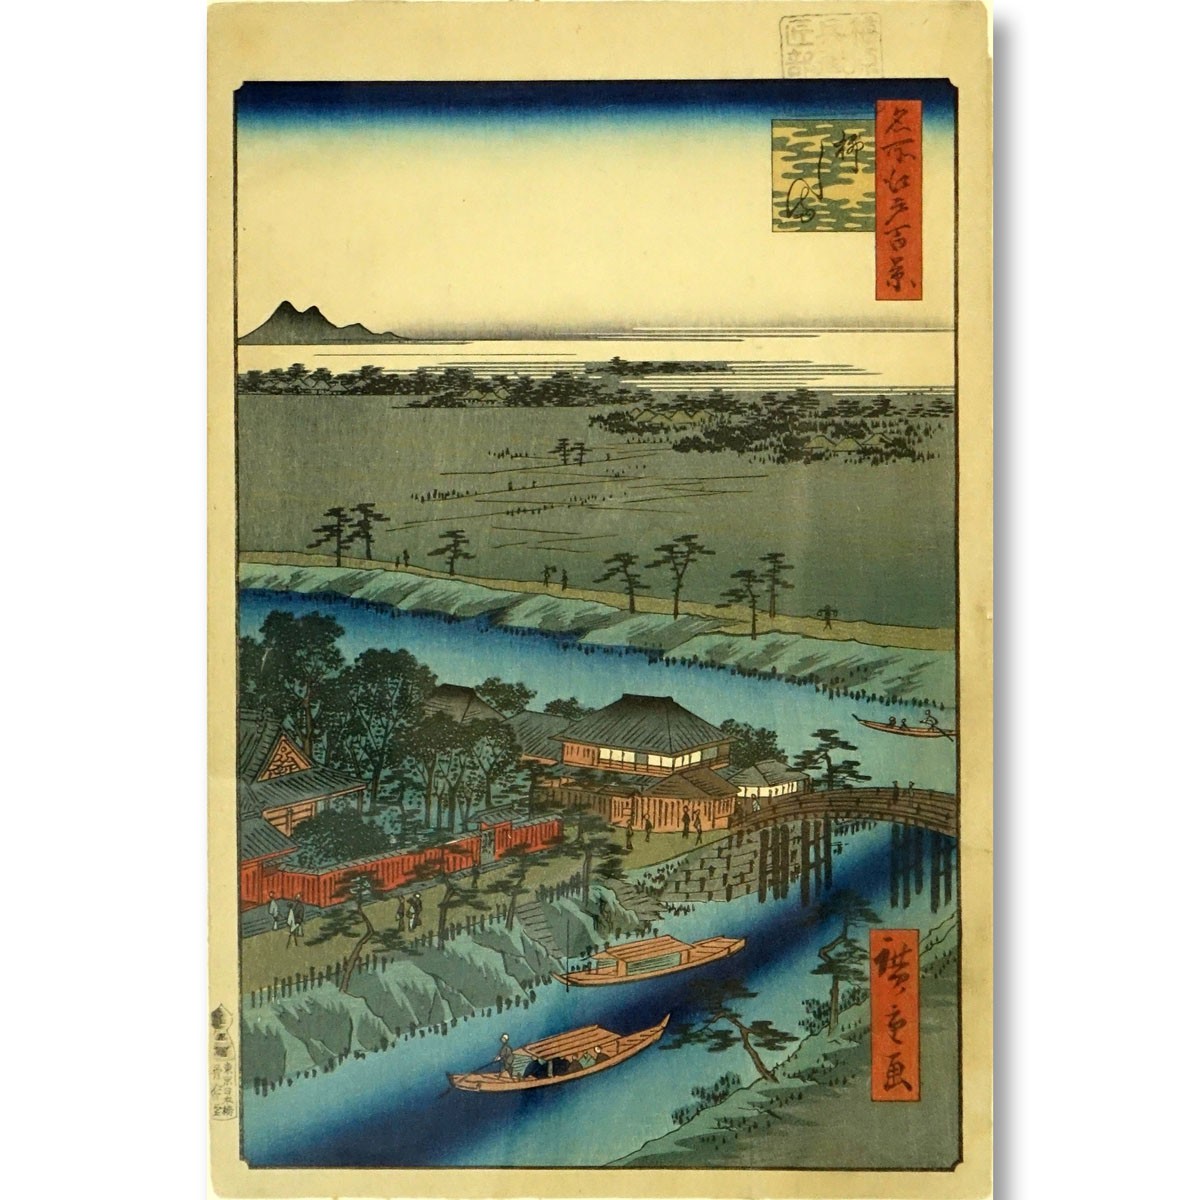 After: Utagawa Hiroshige, Japanese Color Woodblock Print, Landscape Scene with Bridge and Blue River, Signed in the Plate. Stamped marks on margin.